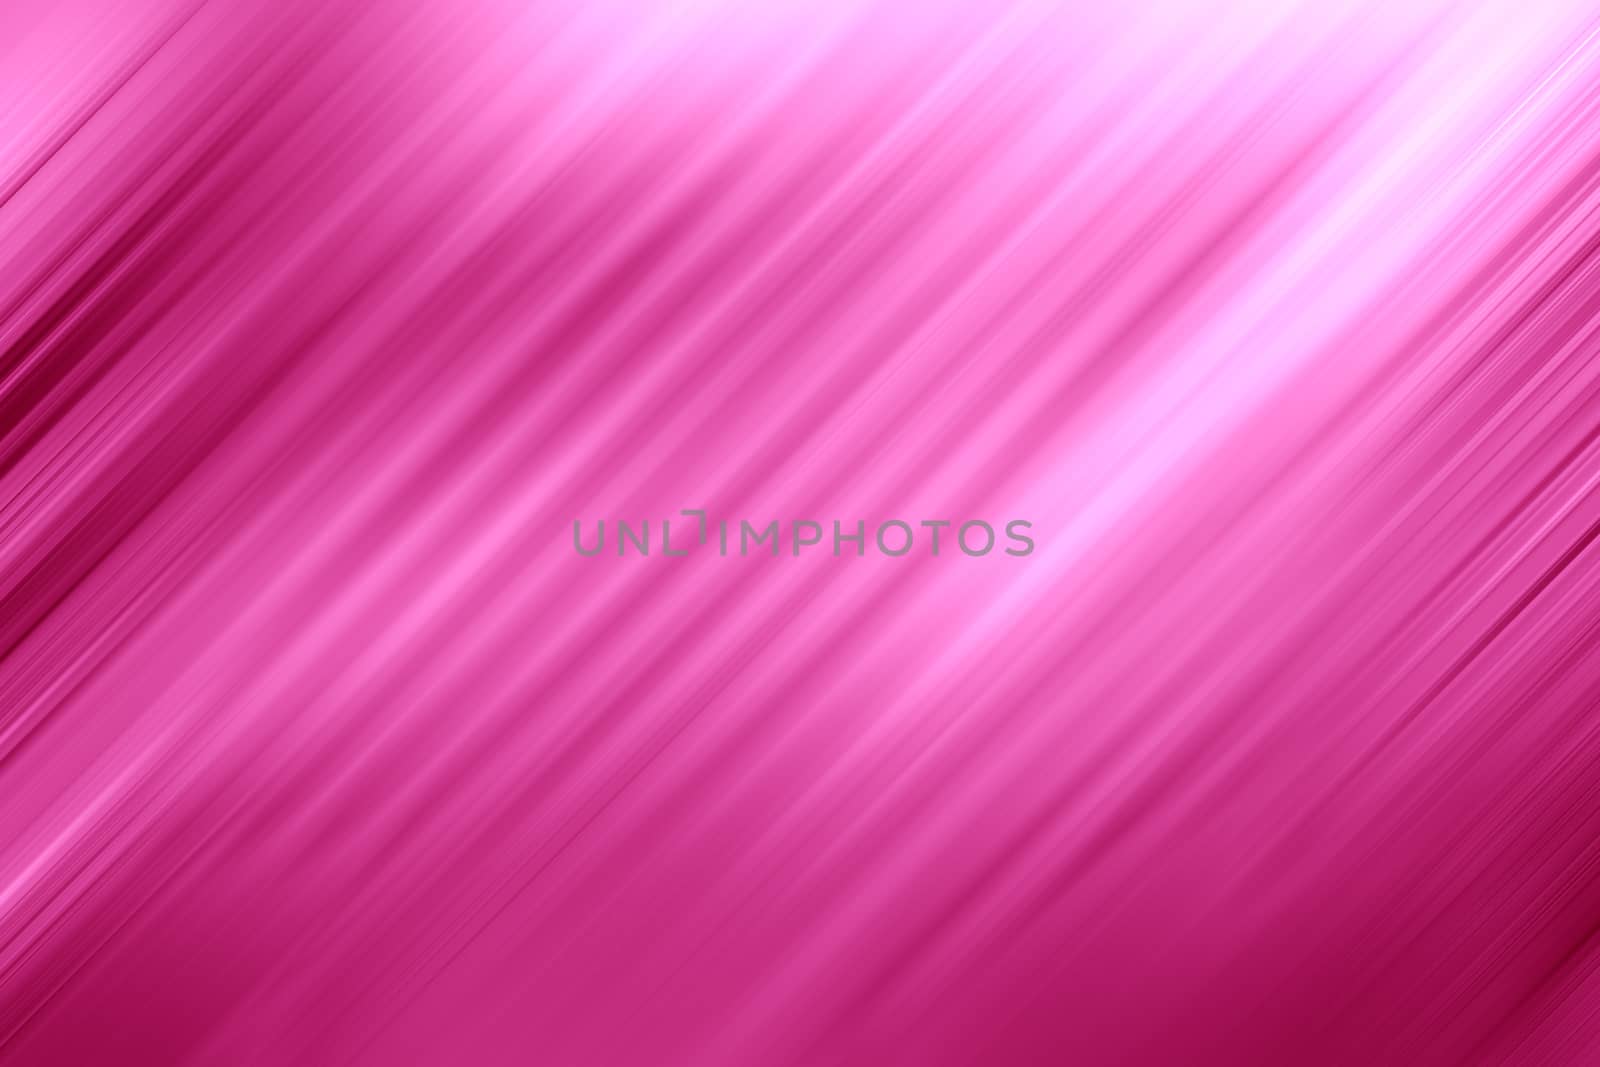 Abstract stylish background for design. Stylish pink background for presentation, wallpaper, banner.